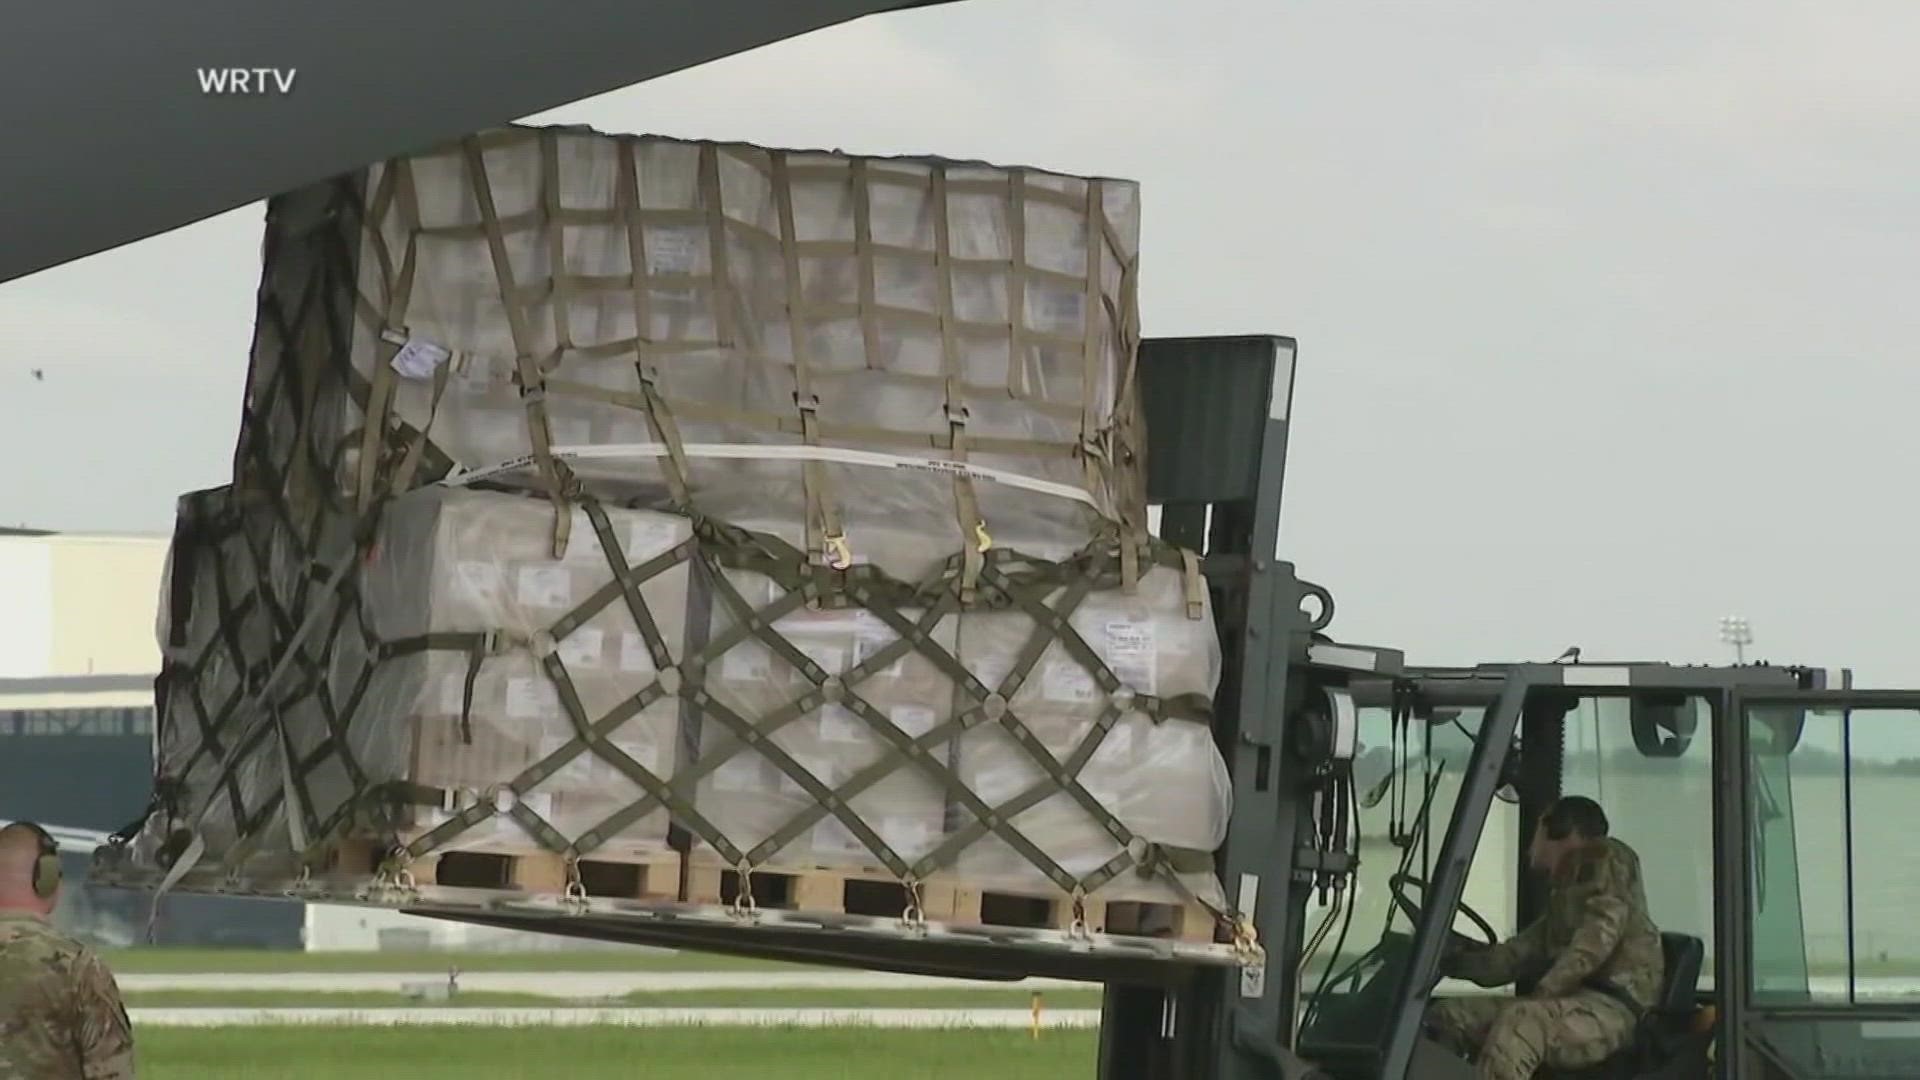 The first shipment of infant formula from Europe arrived in Indiana Sunday morning aboard a military aircraft.